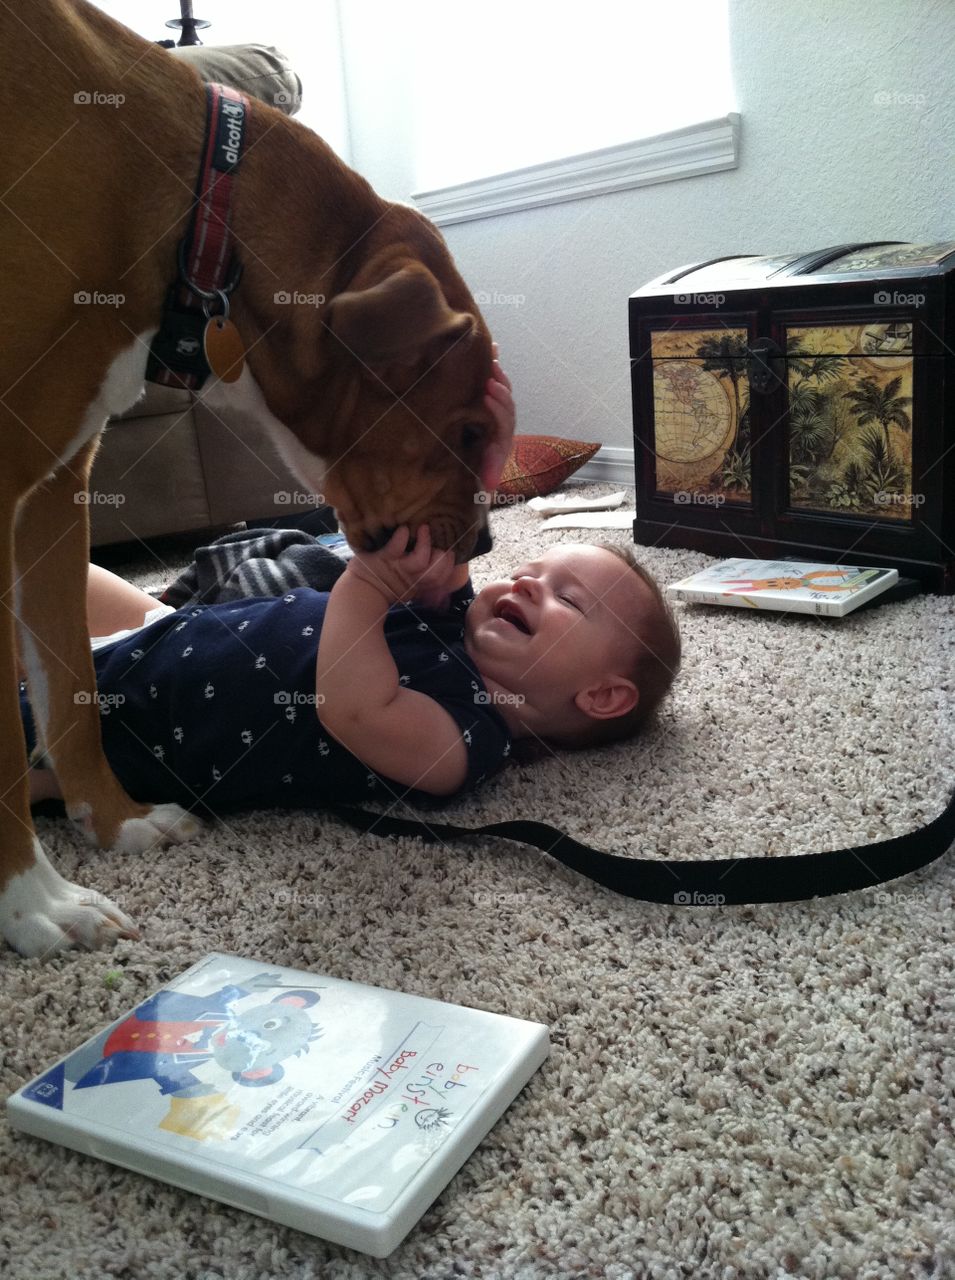 Puppy Love. Baby boy playing on the floor with his pet dog